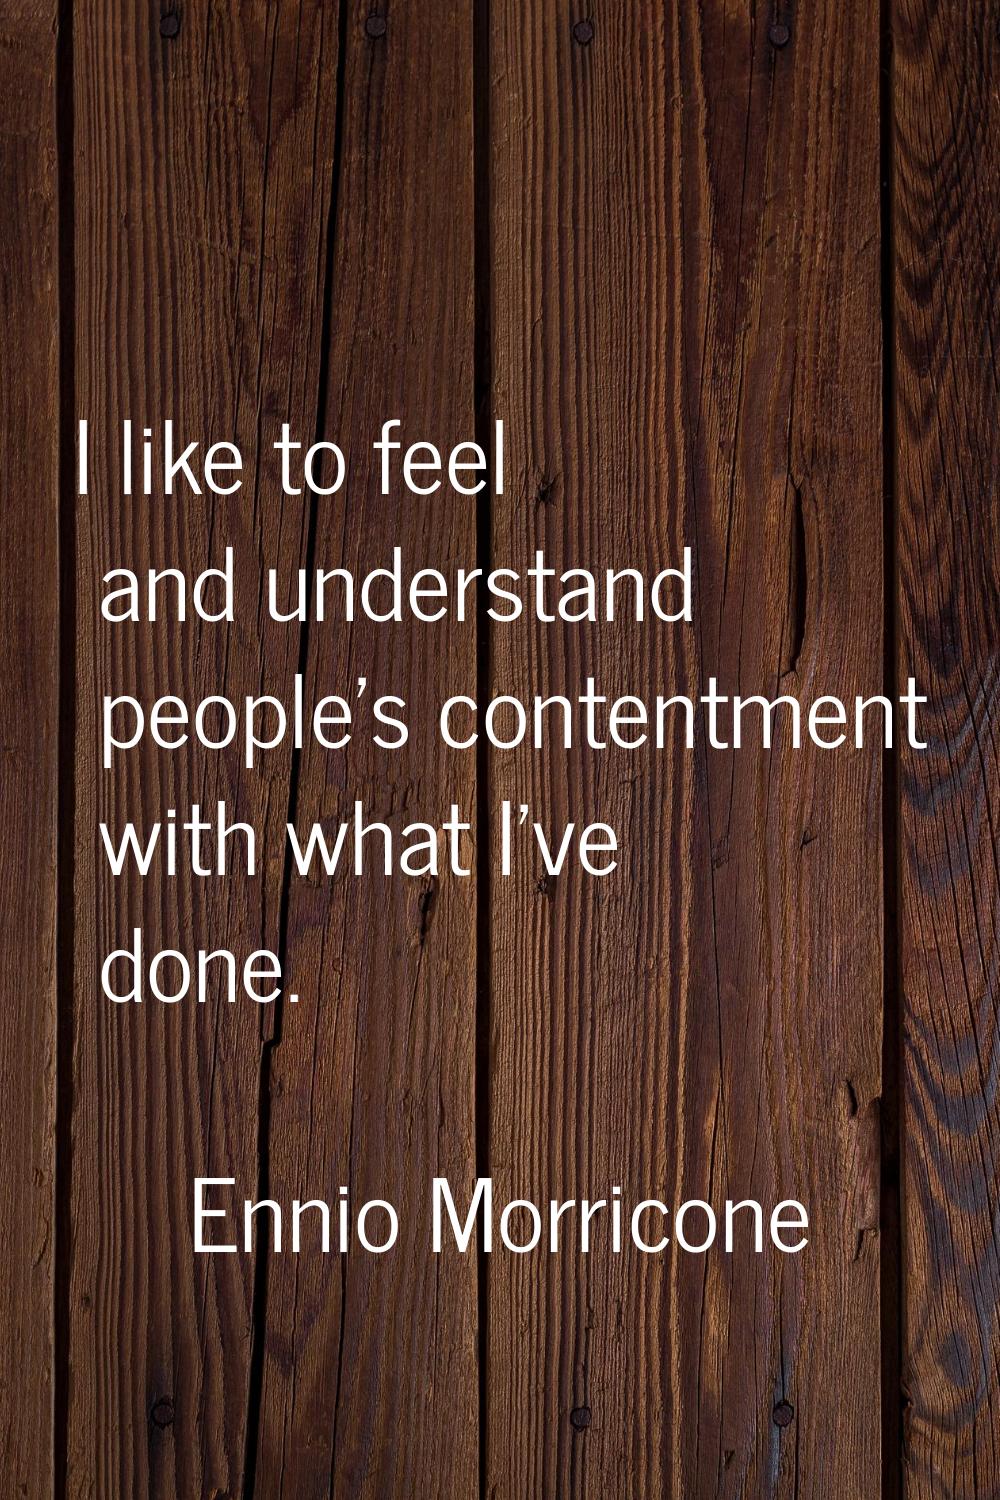 I like to feel and understand people's contentment with what I've done.